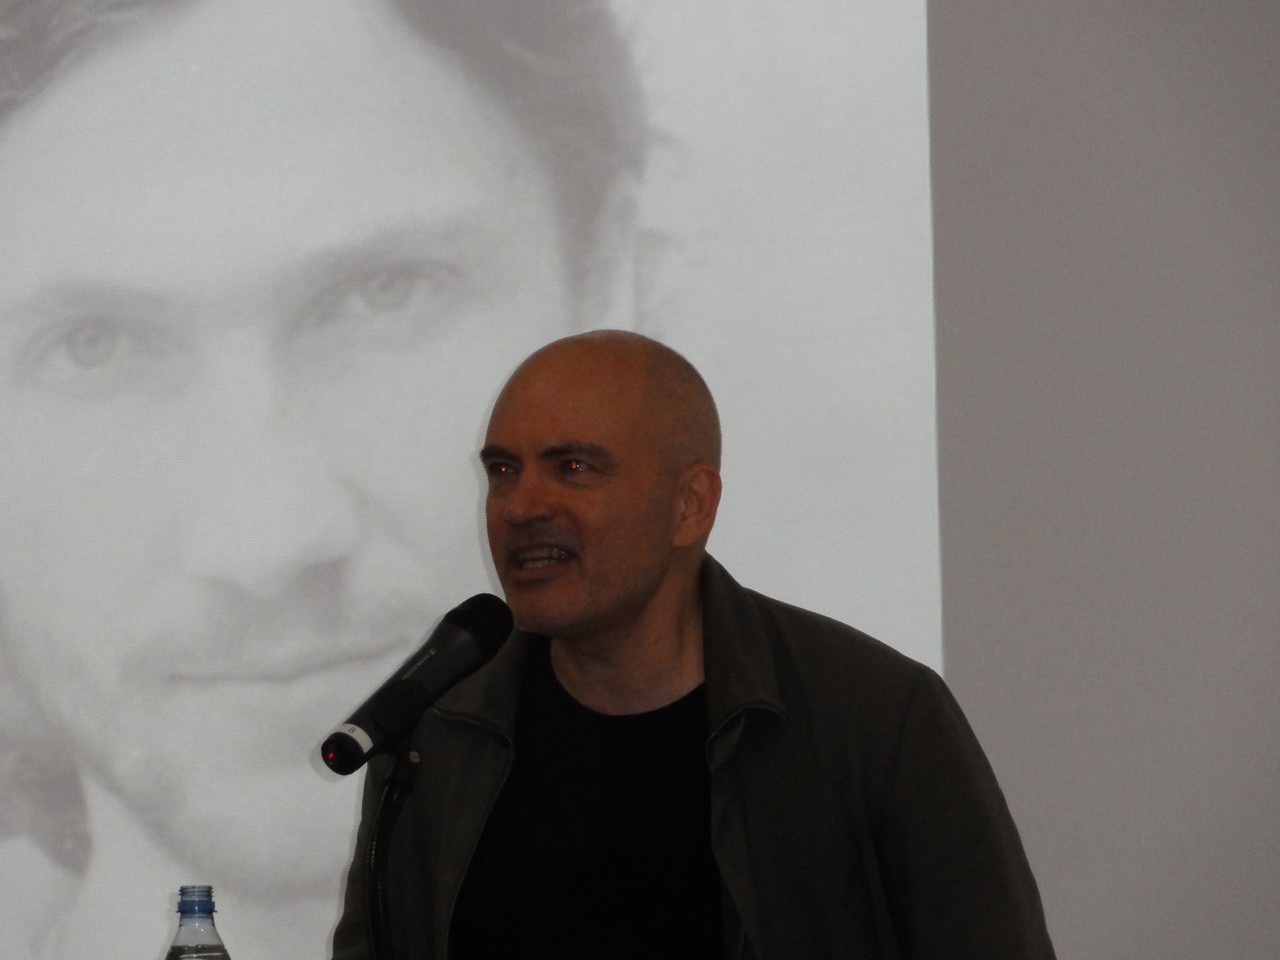 47 David Stubbs at the ELECTRI_CITY Conference 2015.jpg